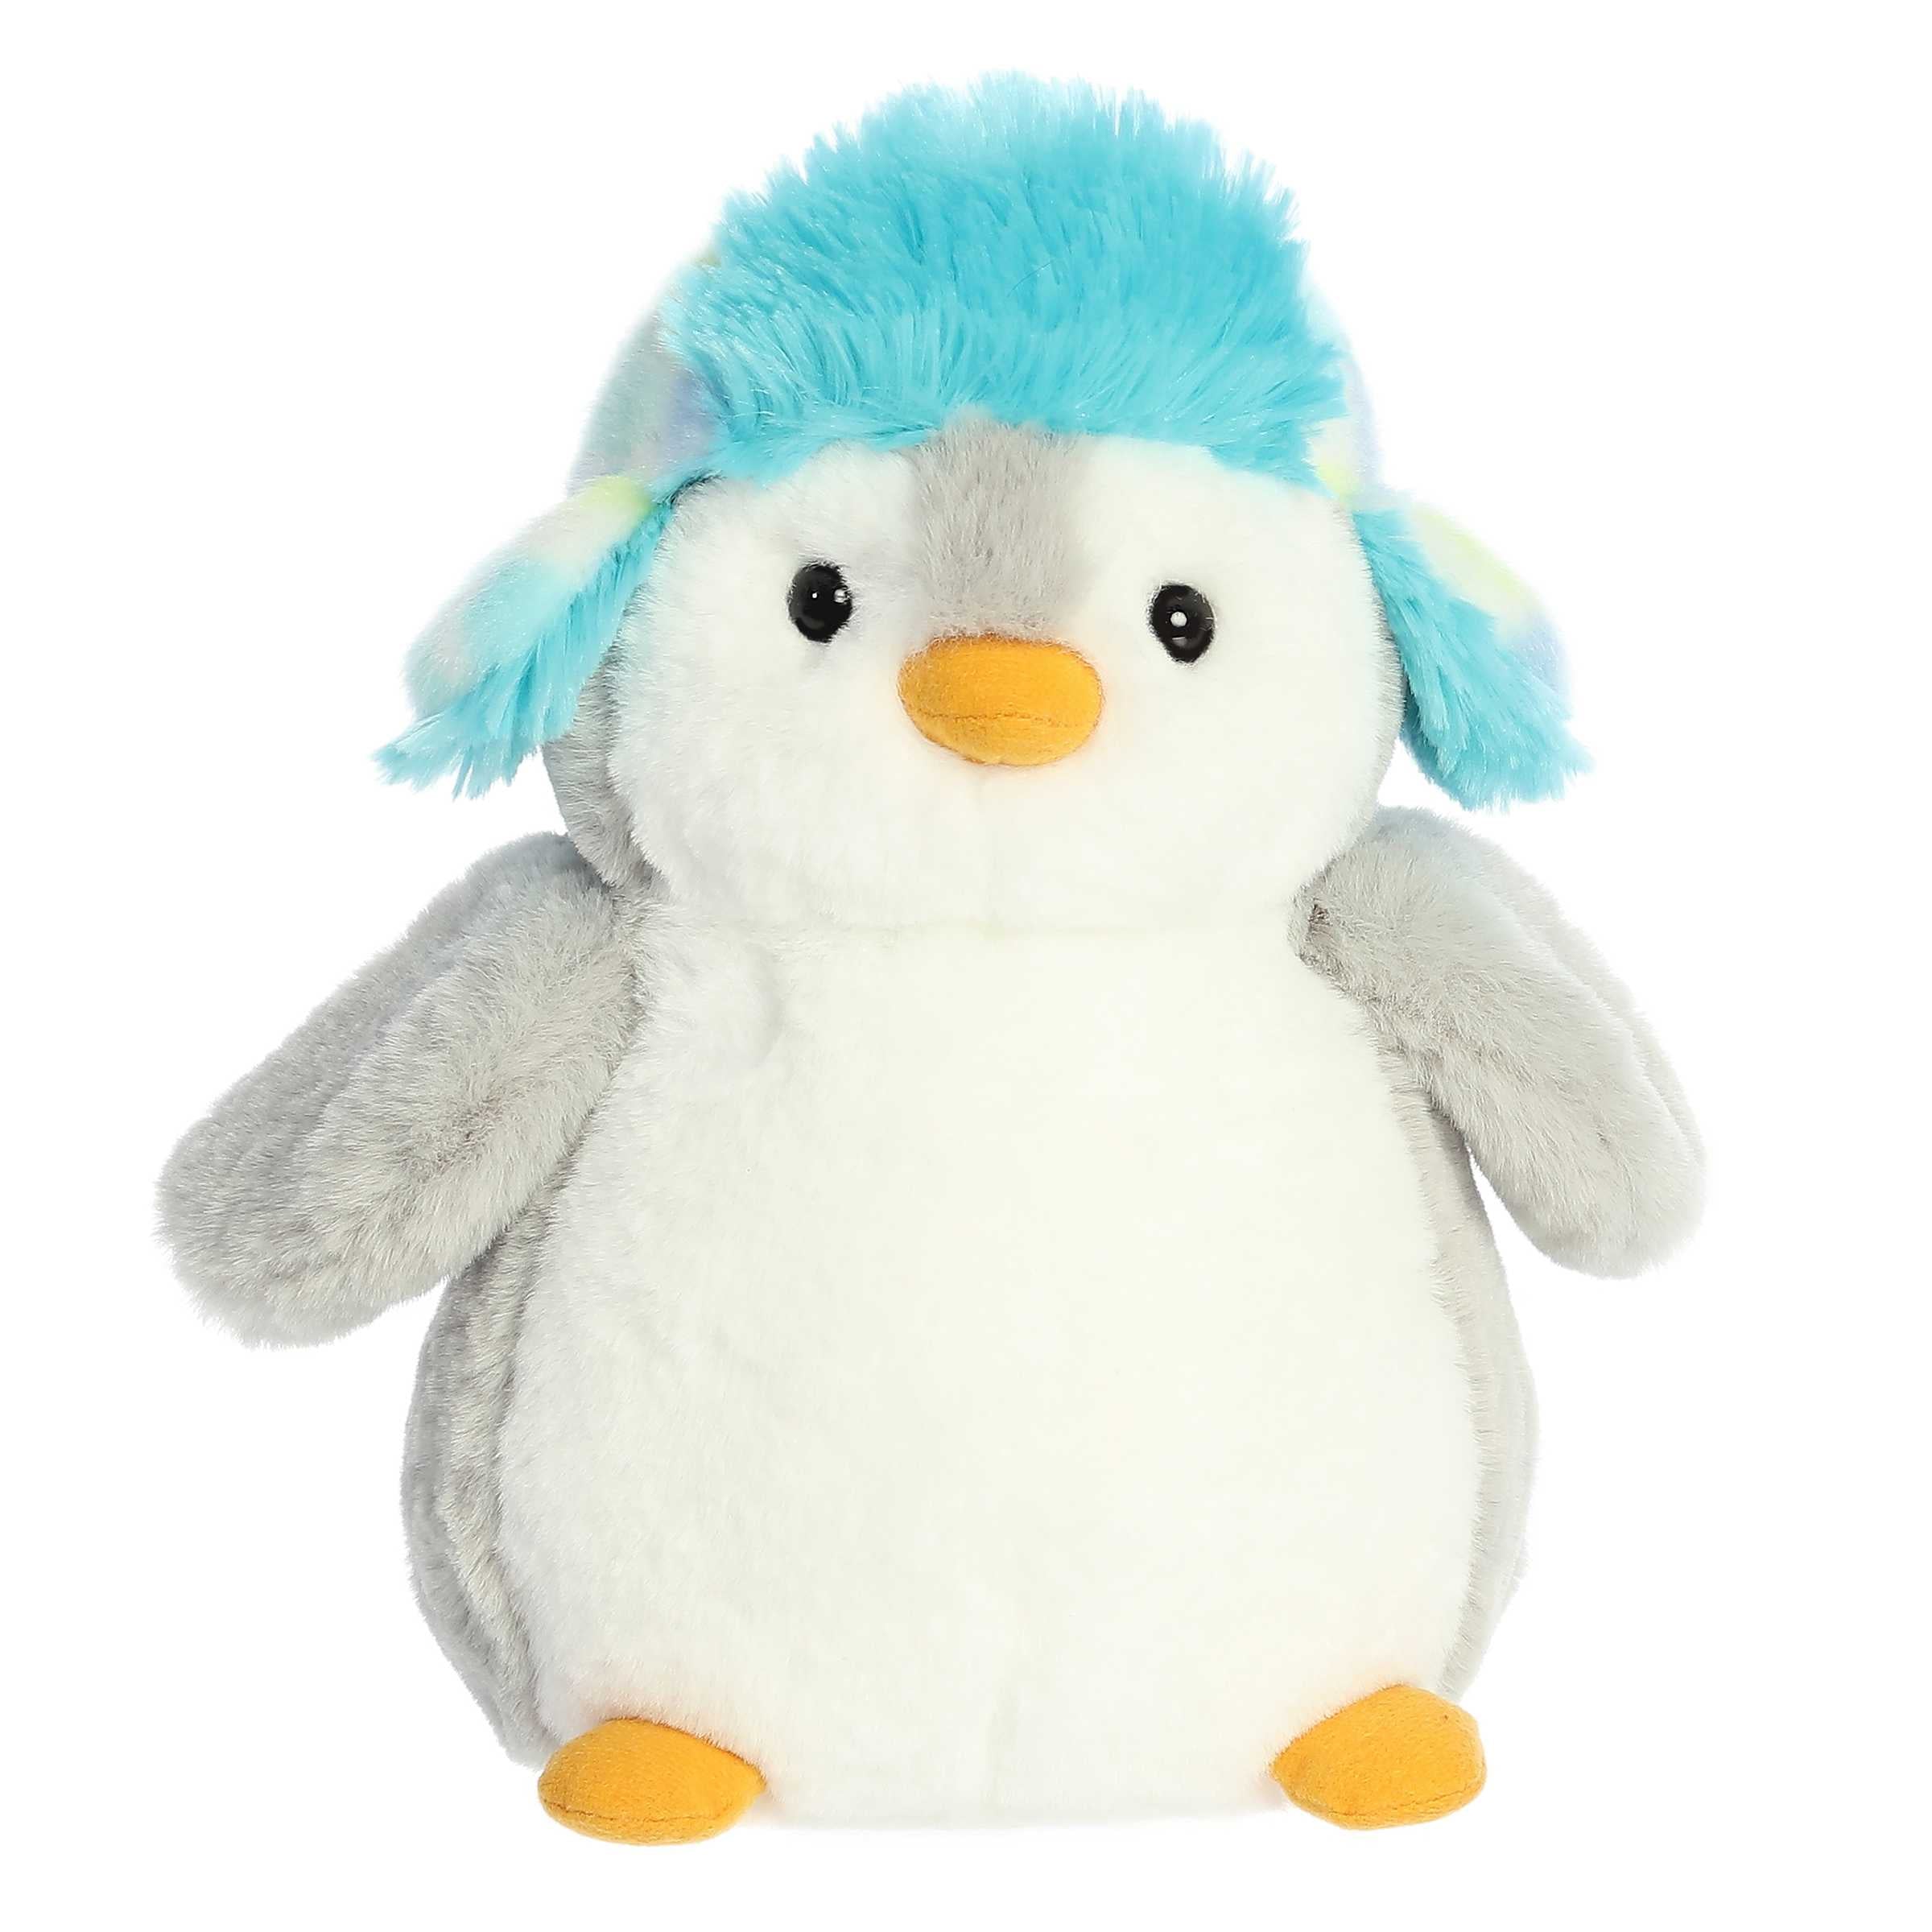 Gray back and white front stubby penguin stuffed animal wearing a blue ushanka hat with fluffy blue trim